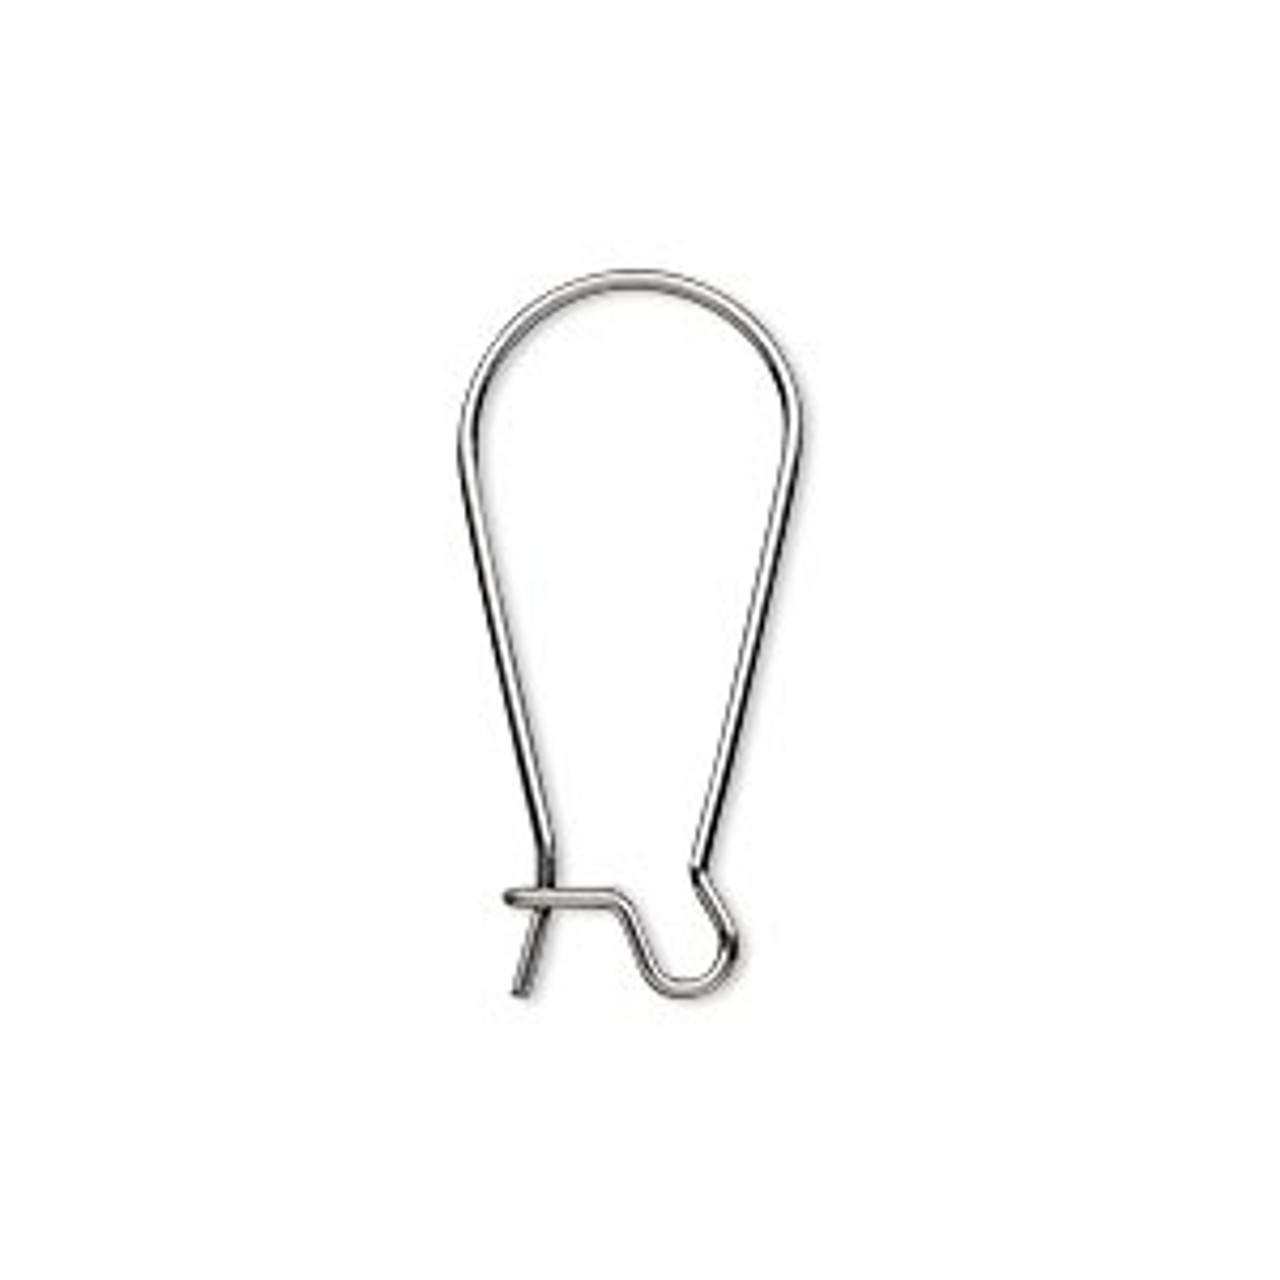 Stainless Steel Earwire - 25mm kidney with open loop and hole - 1 Pair